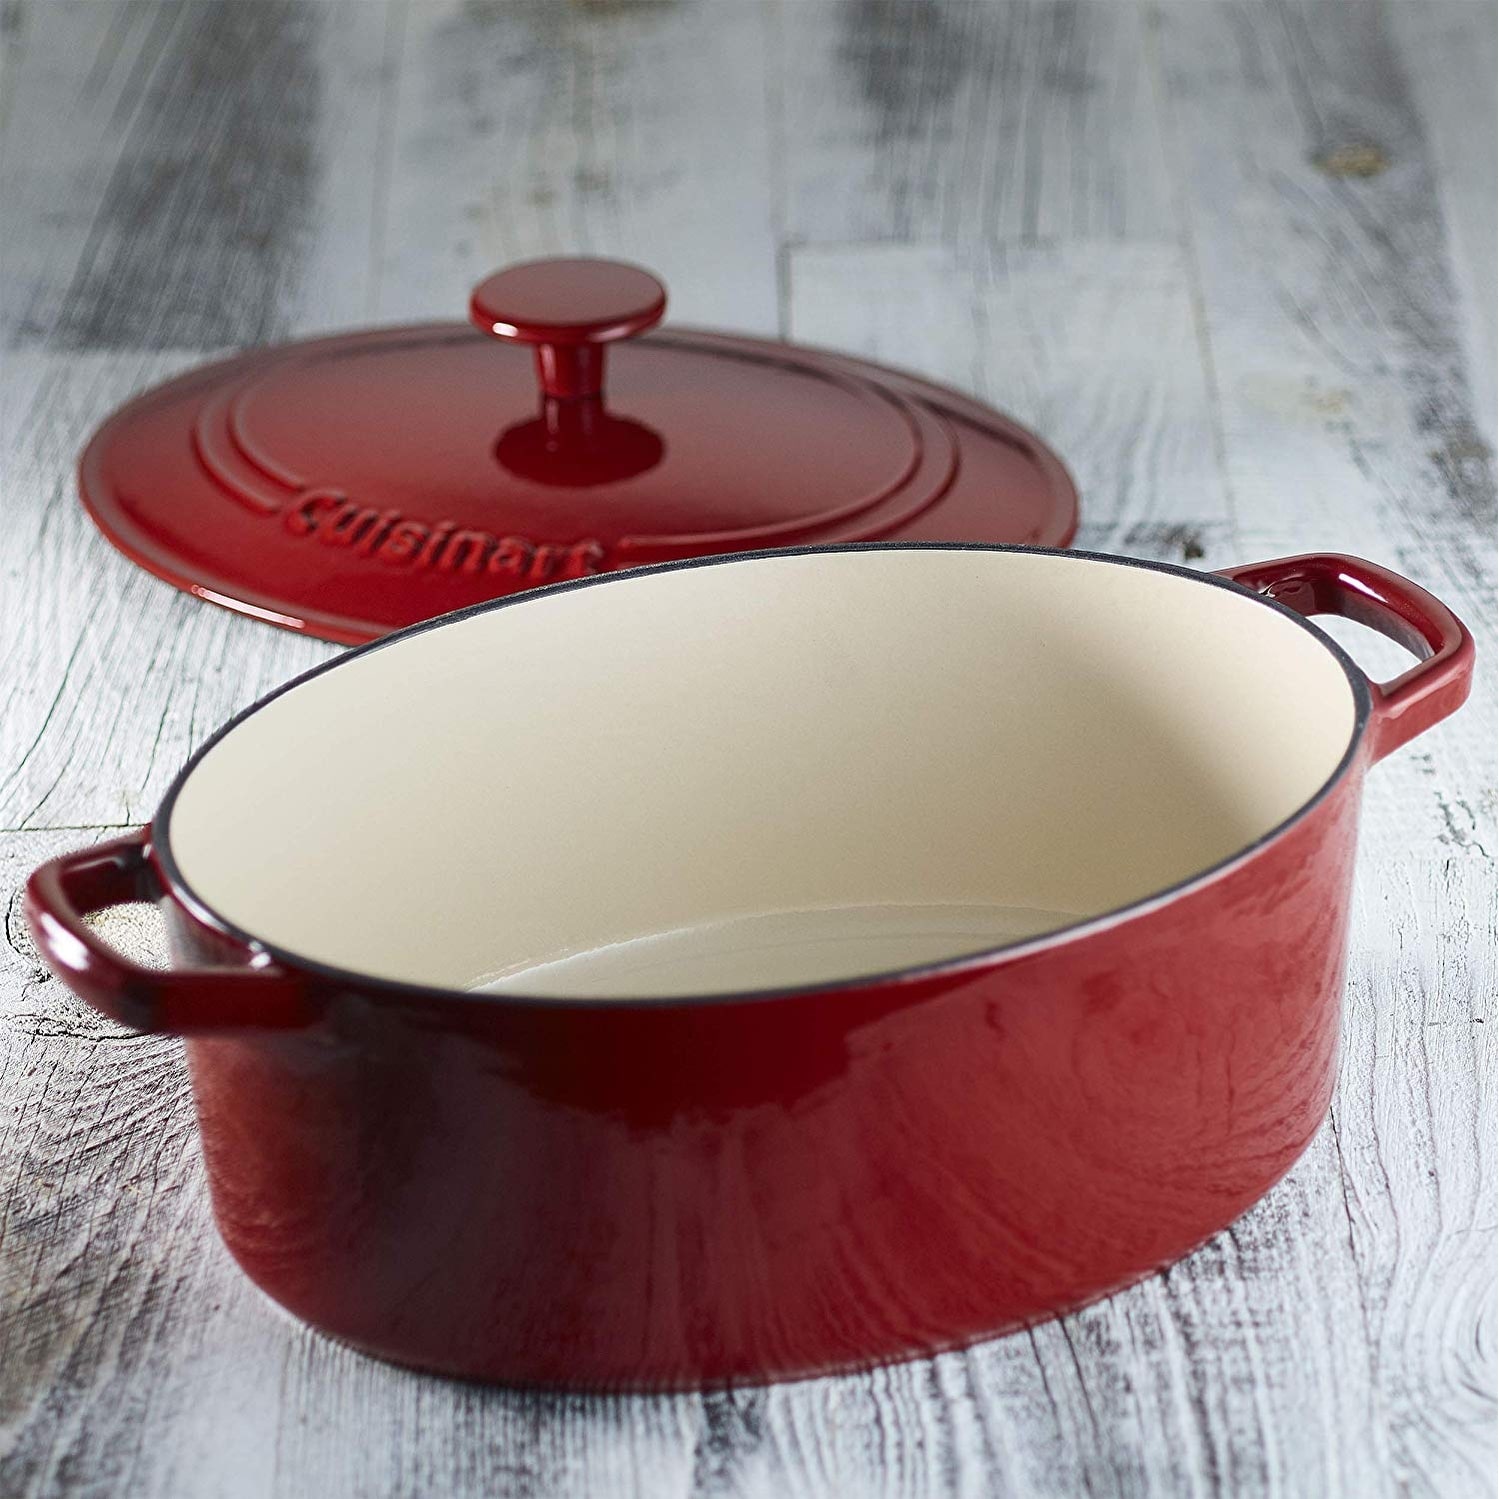 Cuisinart CI755-30CR Chef's Classic Enameled Cast Iron 5-1/2-Quart Oval  Covered Casserole, Cardinal Red - Bed Bath & Beyond - 24031444